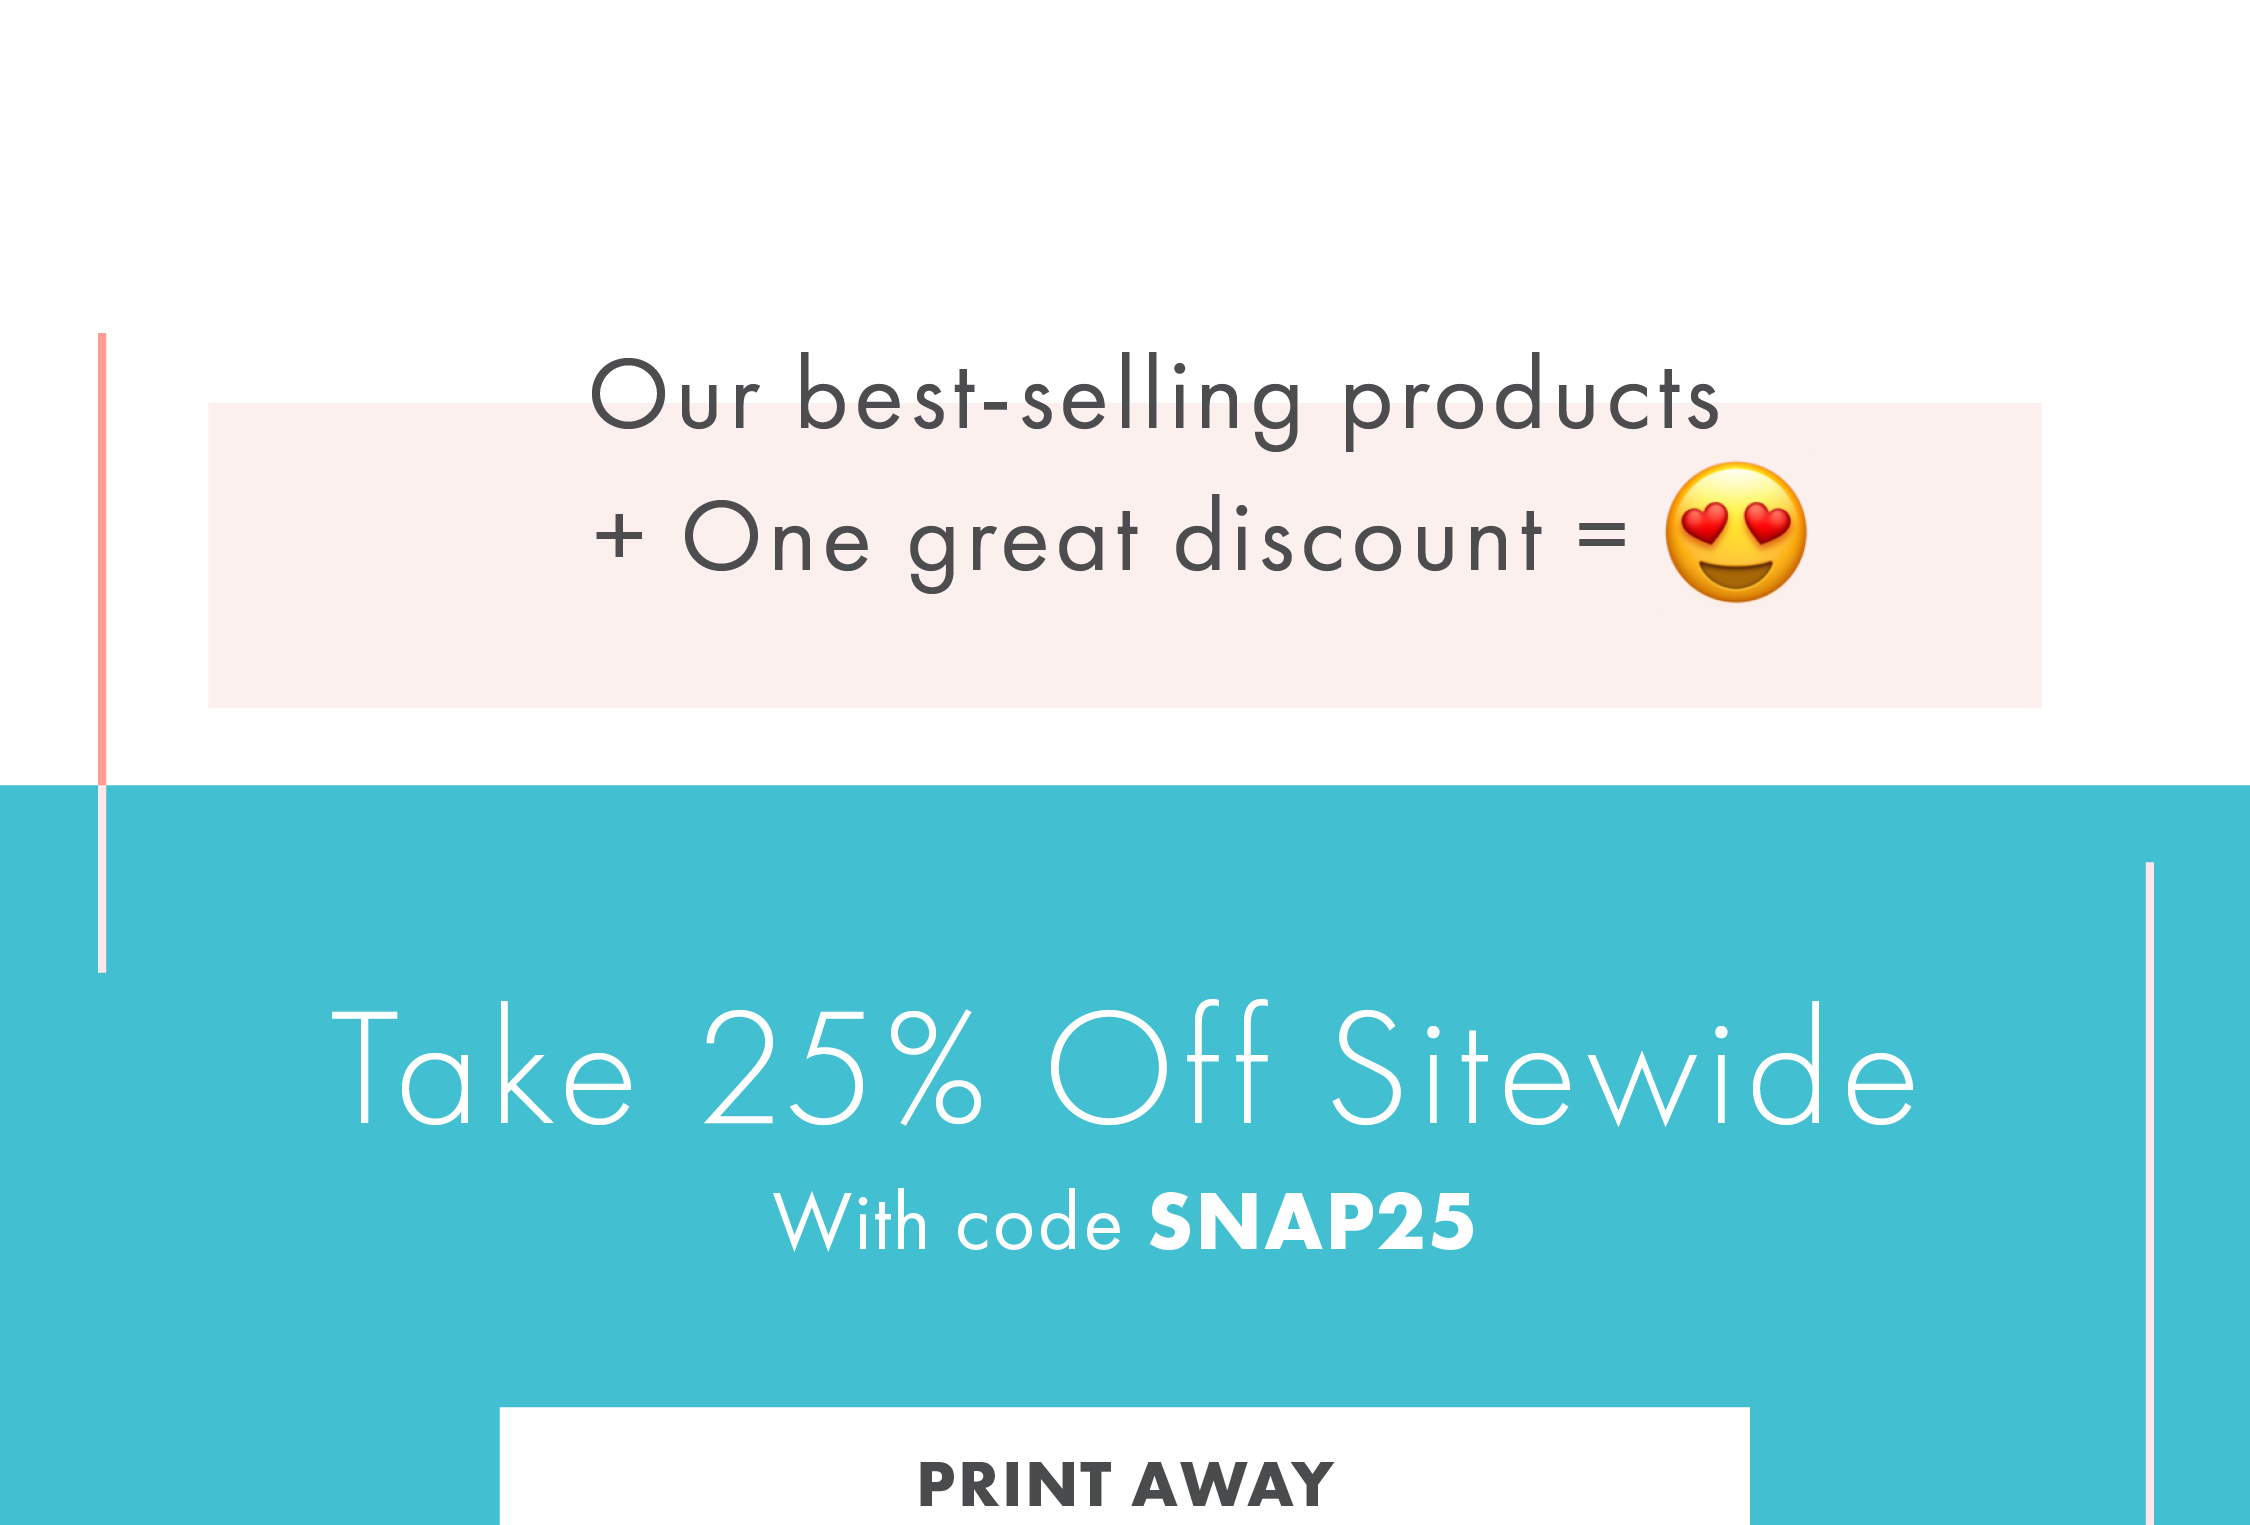 Our best-selling products + One great discount = ??  Take 25% off sitewide With code SNAP25 - PRINT AWAY